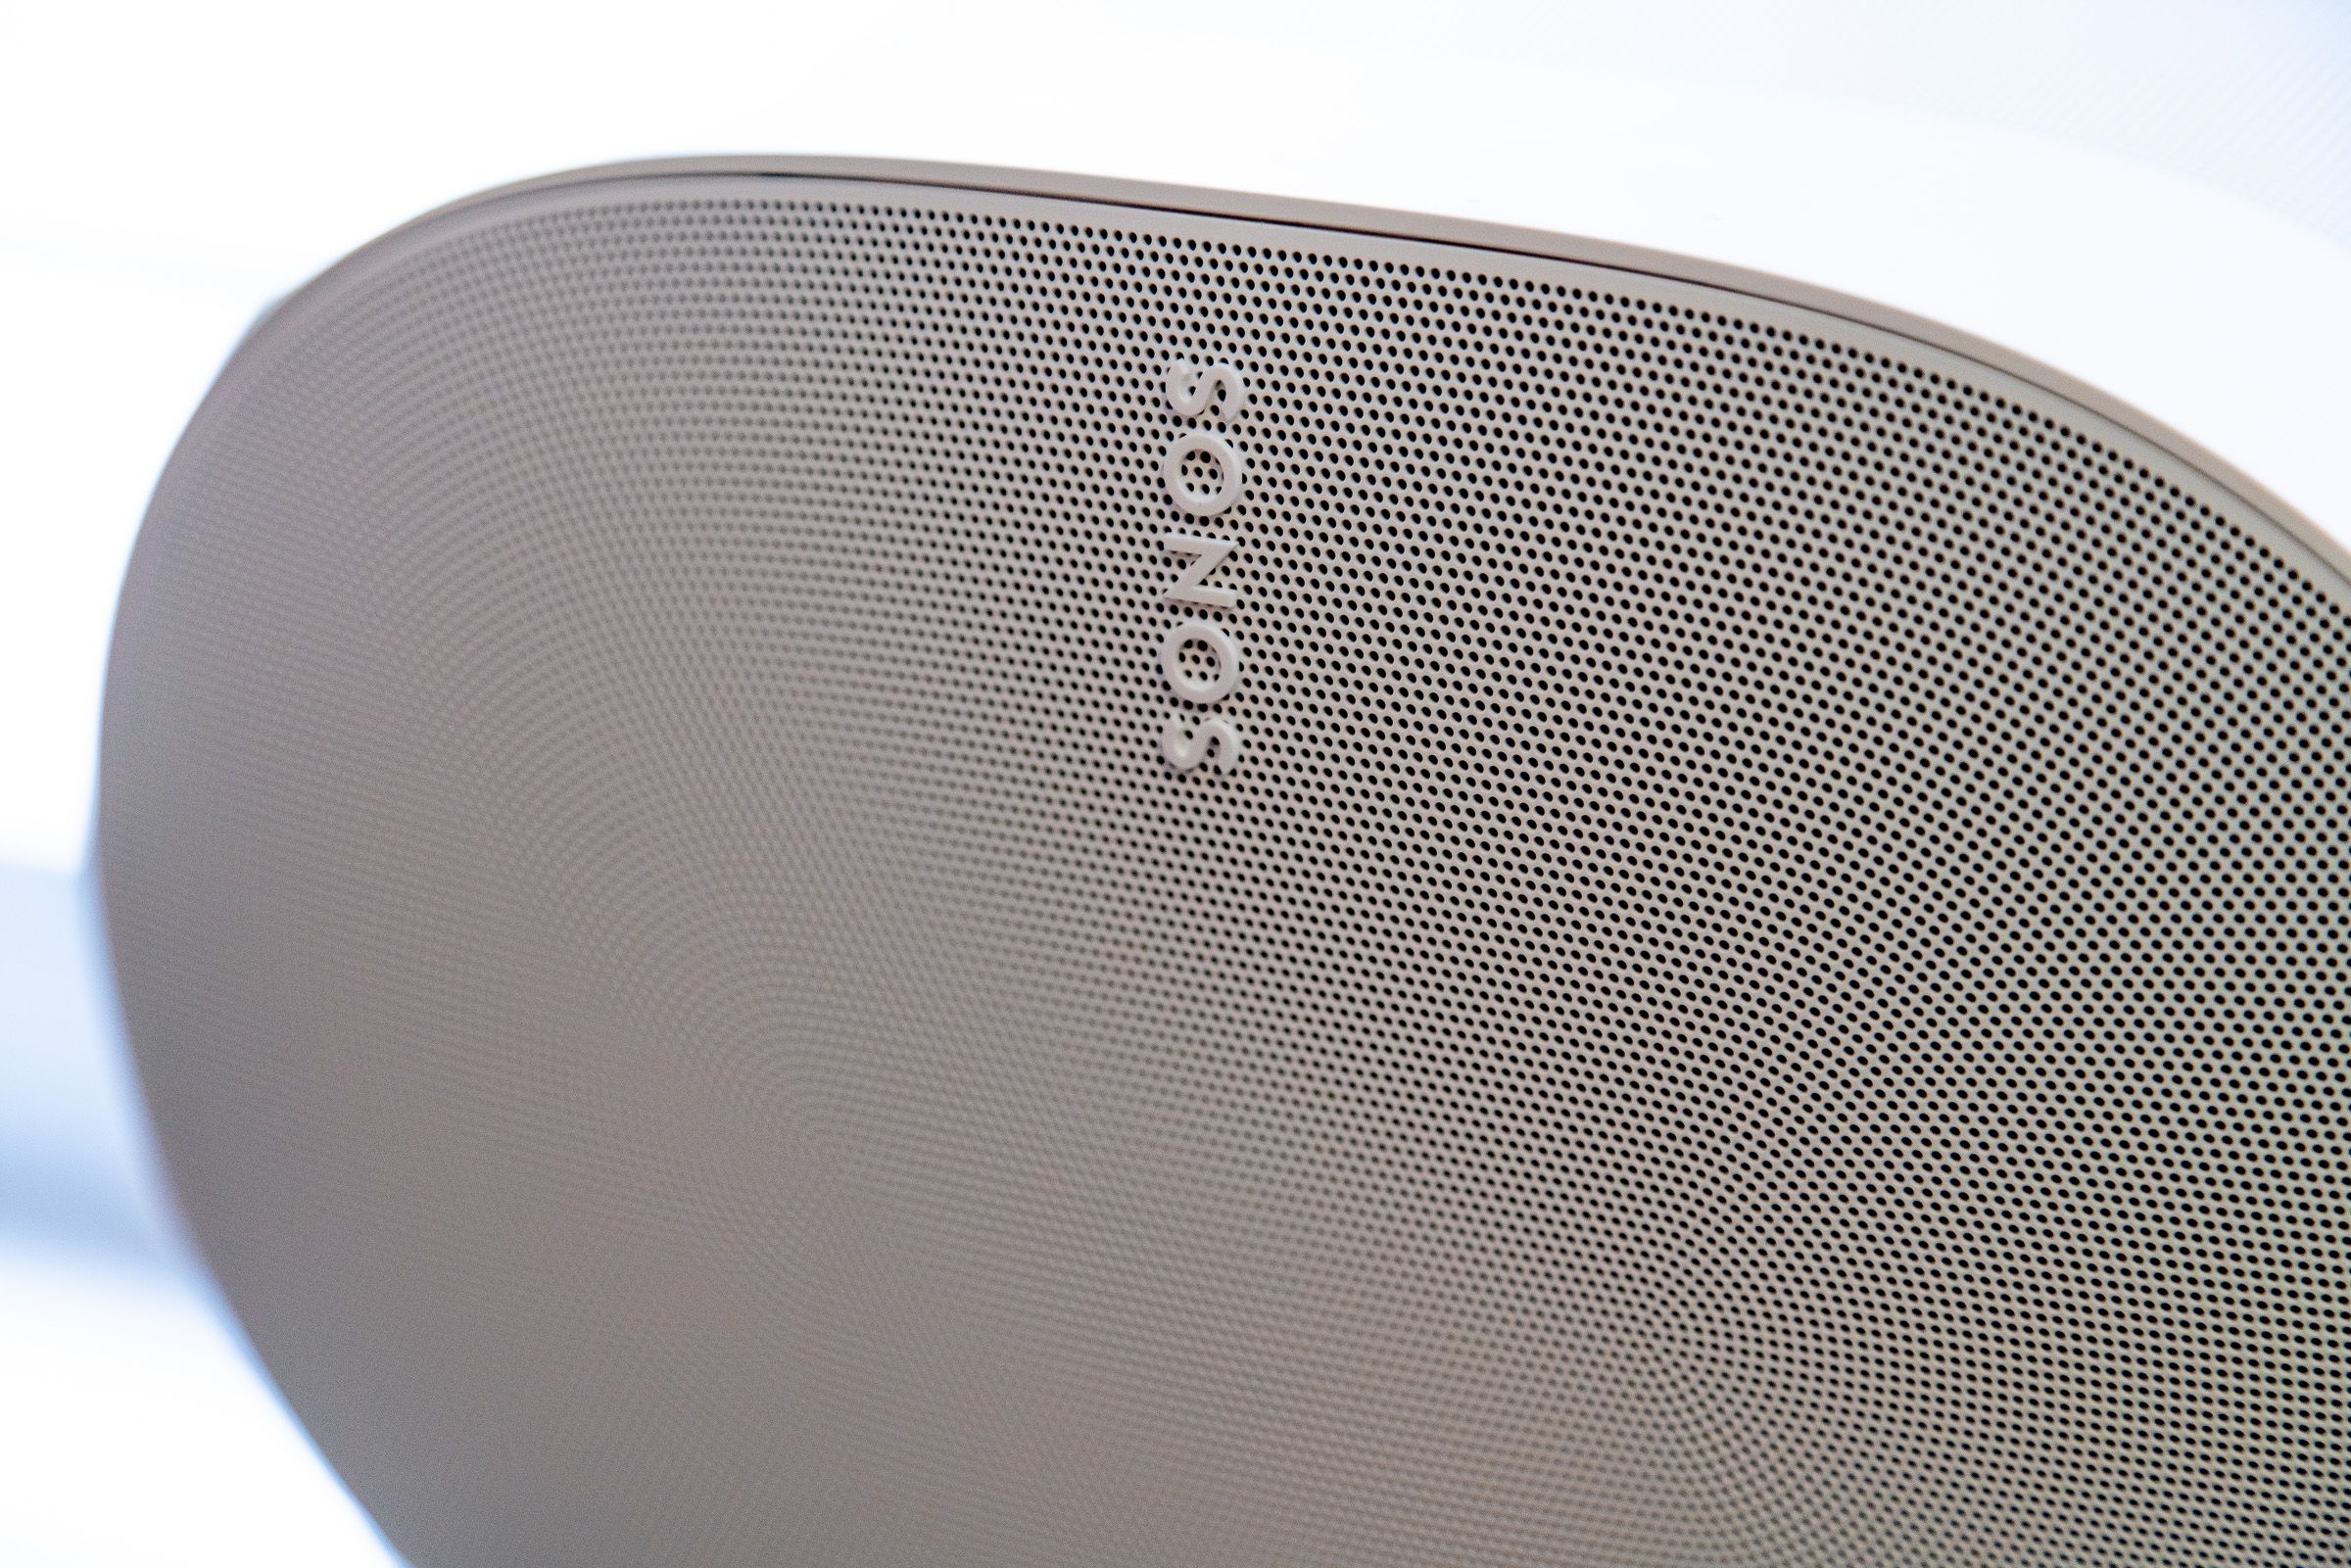 sfærisk Stejl fremtid The Verge on Twitter: "Sonos CEO says old products have long life ahead as  new "era" arrives https://t.co/PJAahUiomy https://t.co/iivAsMRvcH" / Twitter